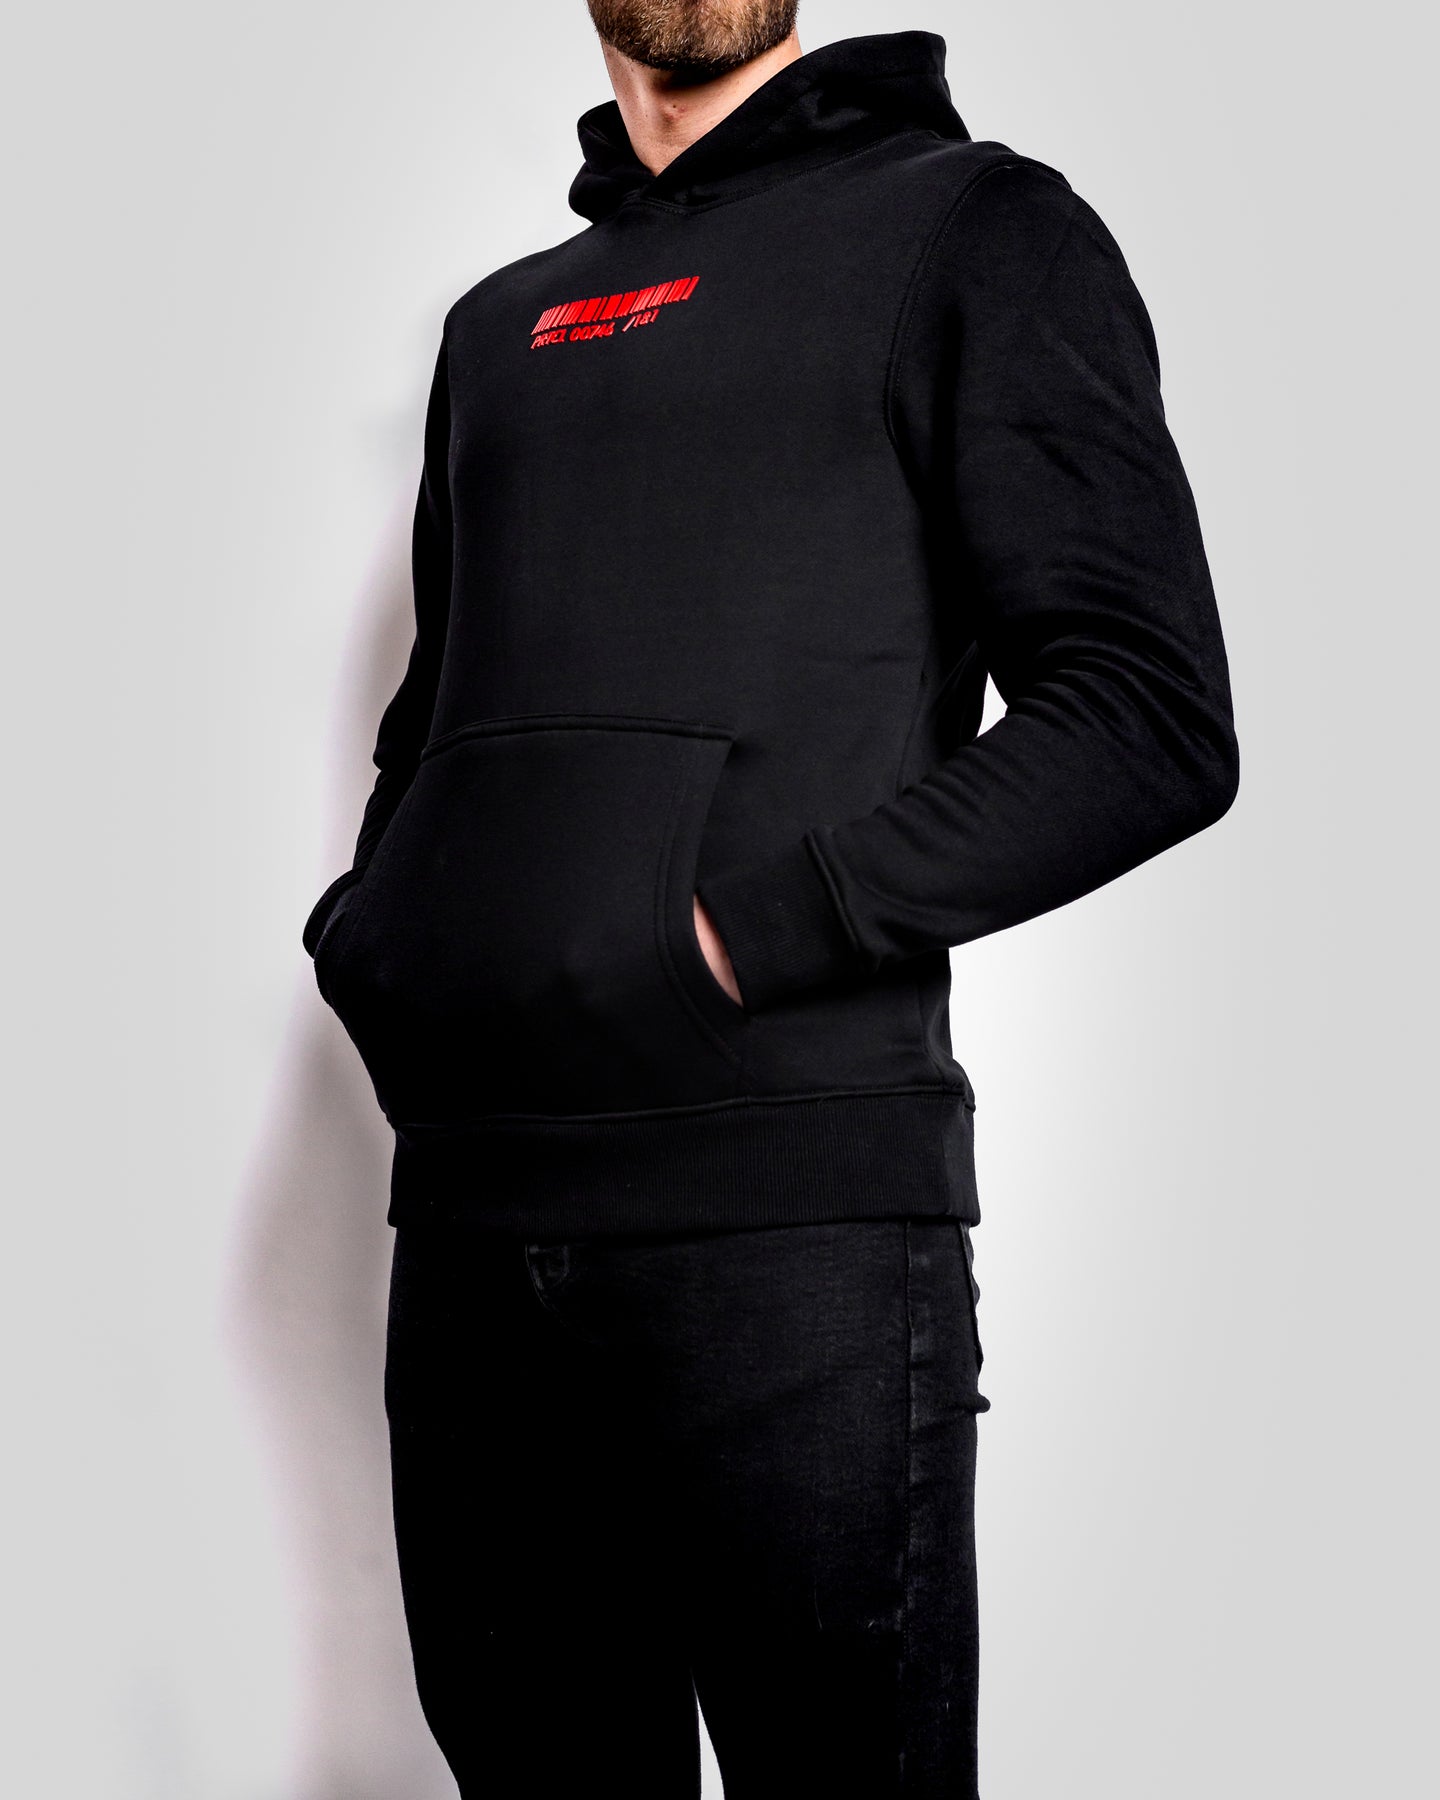 PRTCL Capsule Collection Hoodie Black – Nicky Romero